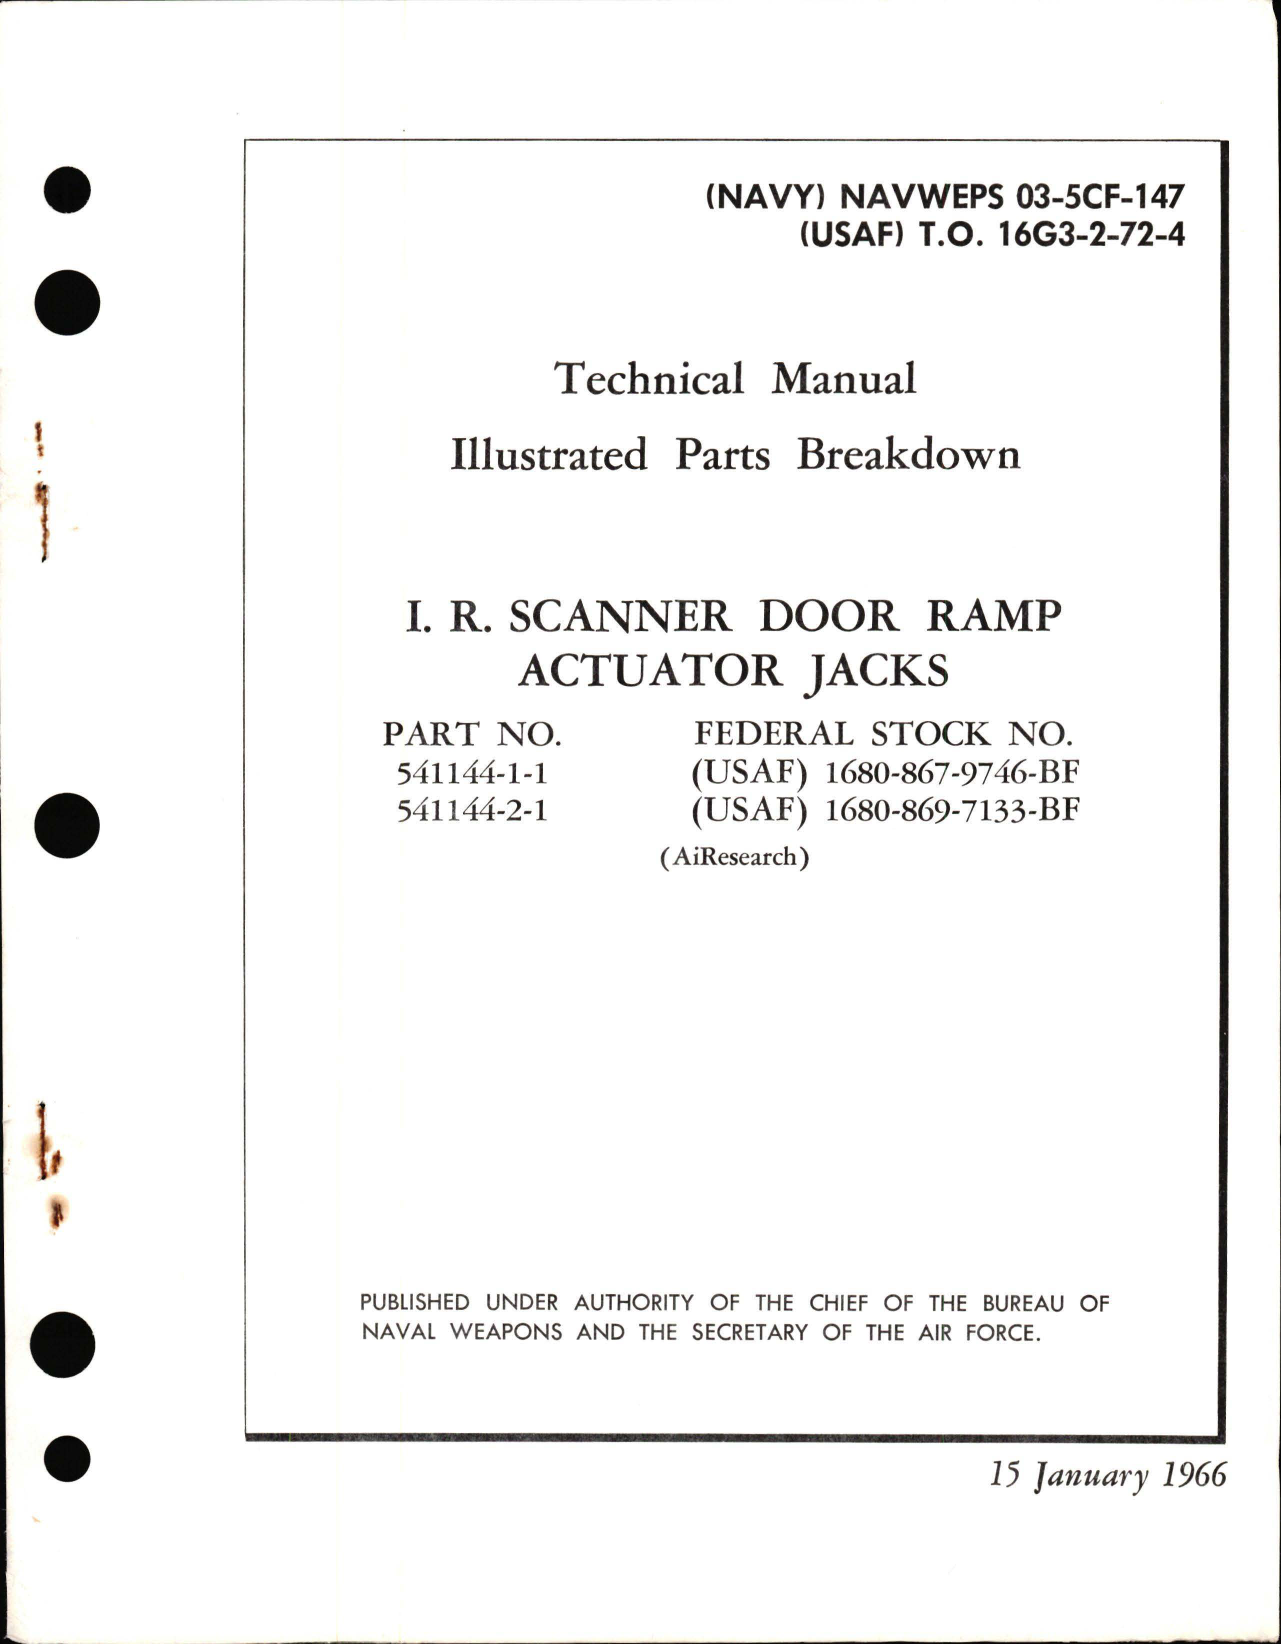 Sample page 1 from AirCorps Library document: Illustrated Parts Breakdown for I.R. Scanner Door Ramp Actuator Jacks - Parts 541144-1-1 and 541144-2-11 